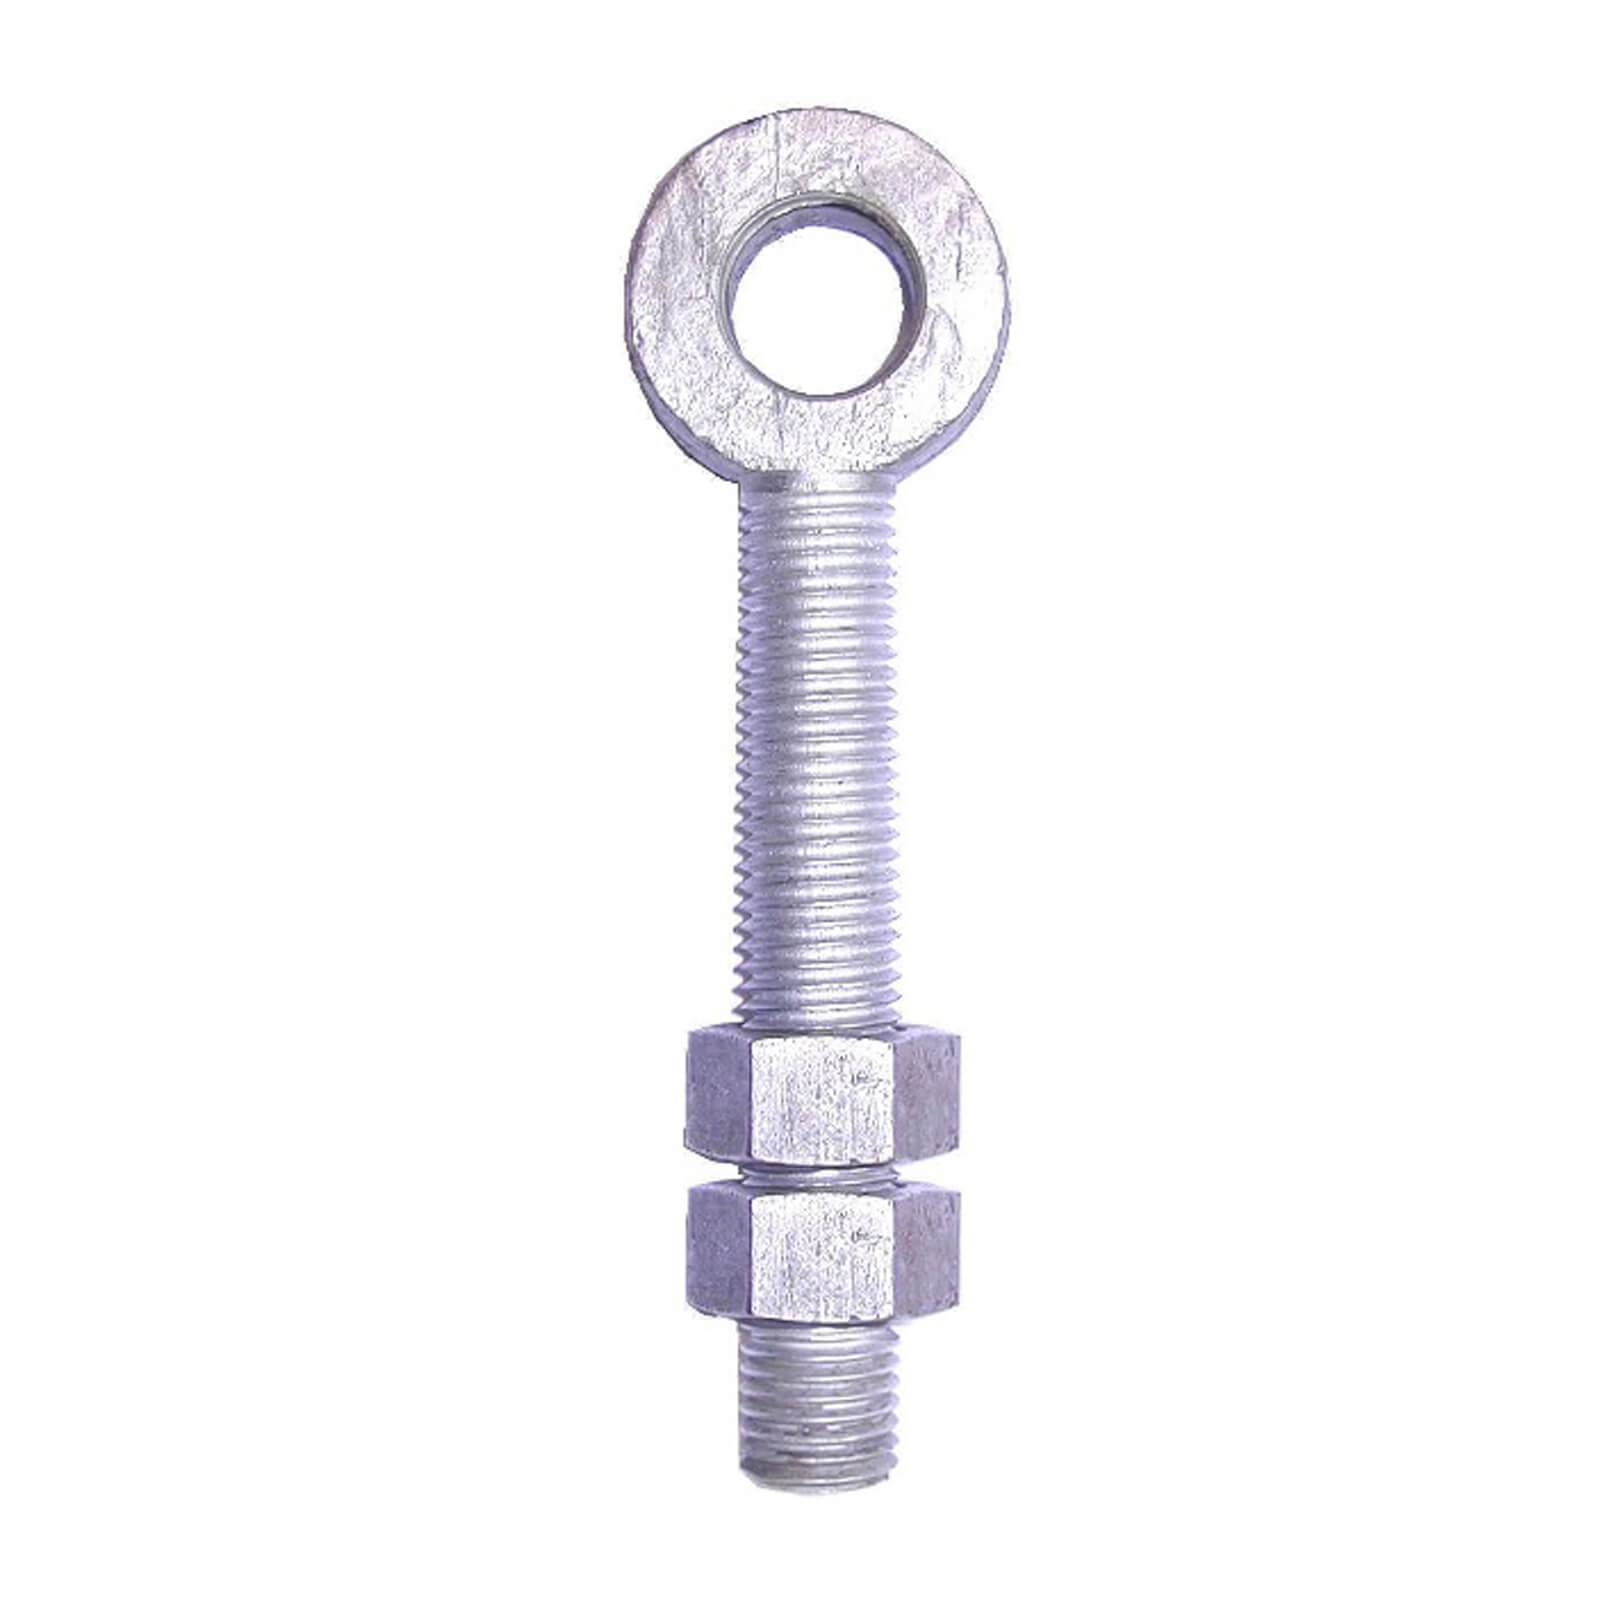 Adjustable Gate Eye with 2 Nuts 3/4" Pin Zinc Plated Various Lengths Available 